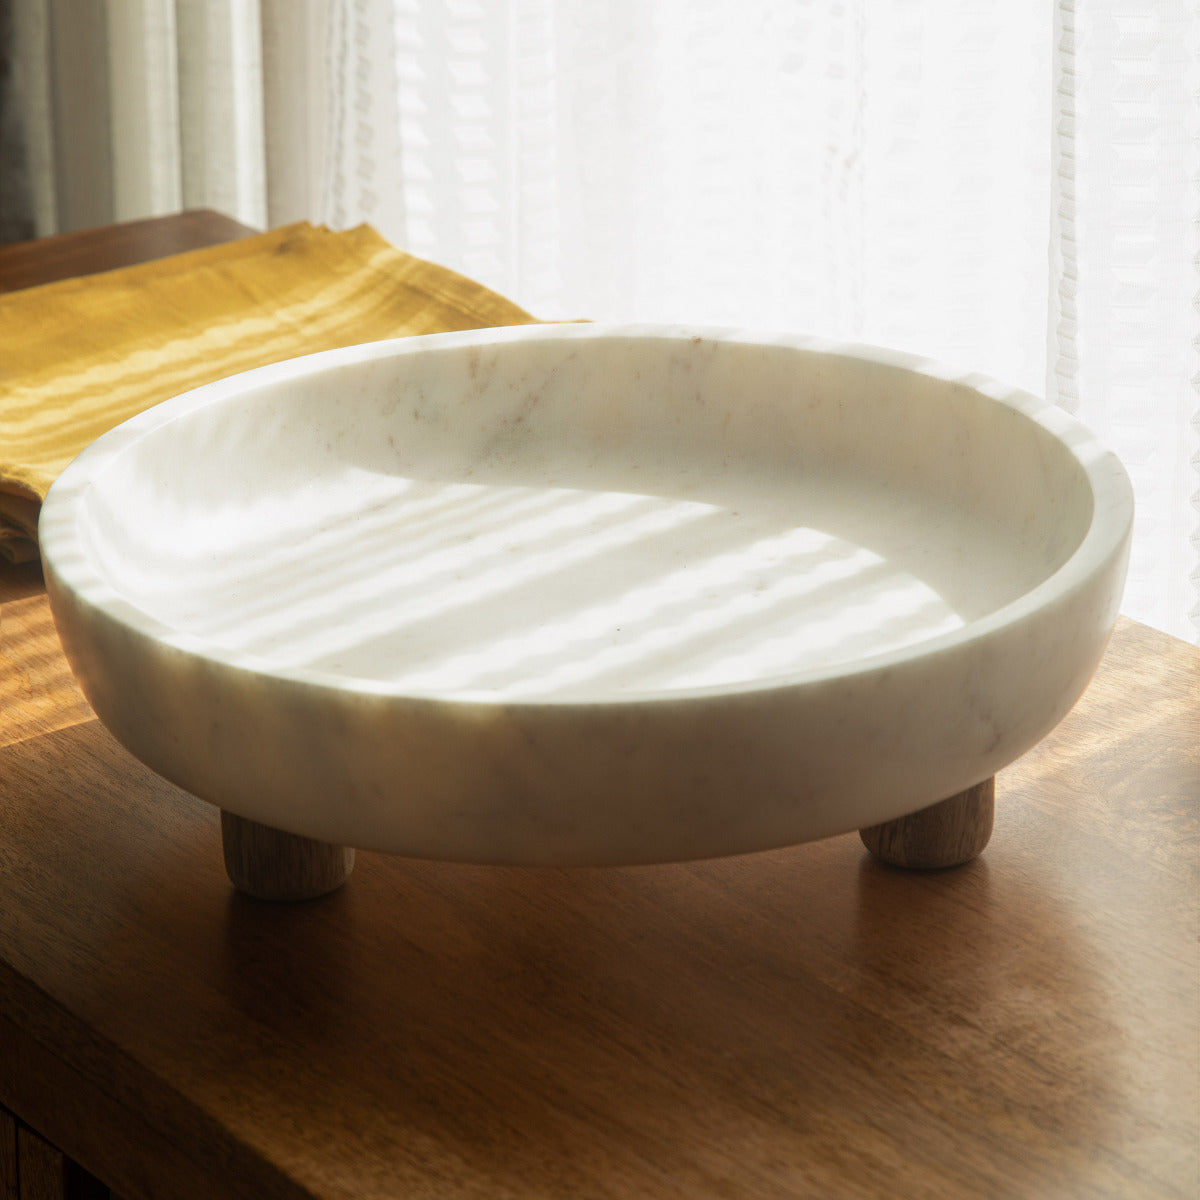 Marble bowl with wooden legs